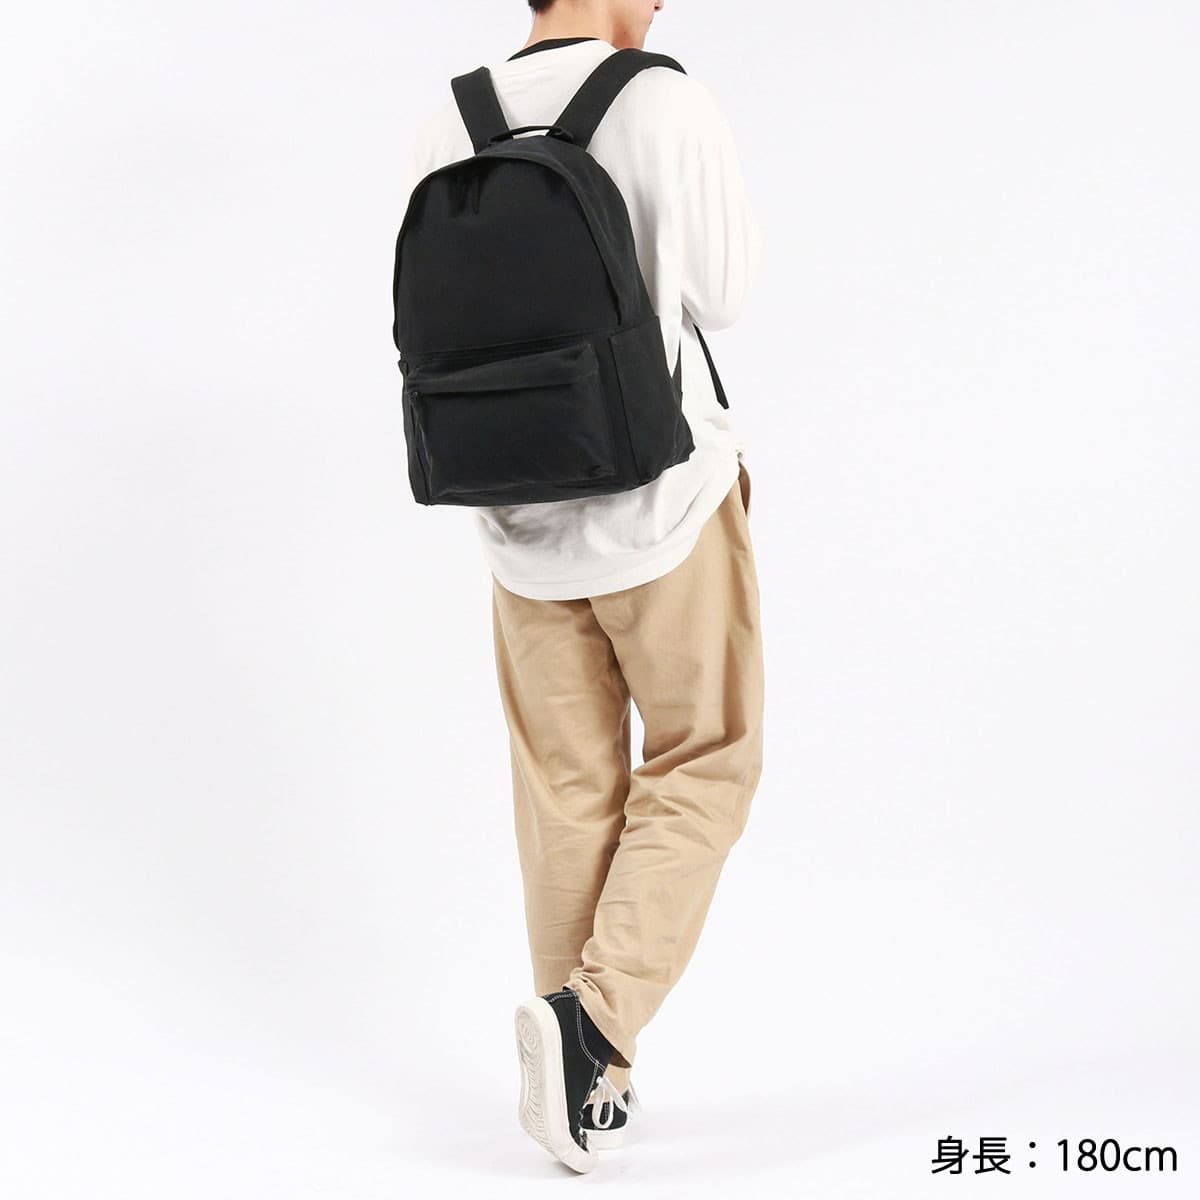 hobo ホーボー EVERYDAY BACKPACK COTTON CANVAS VINTAGE WASH